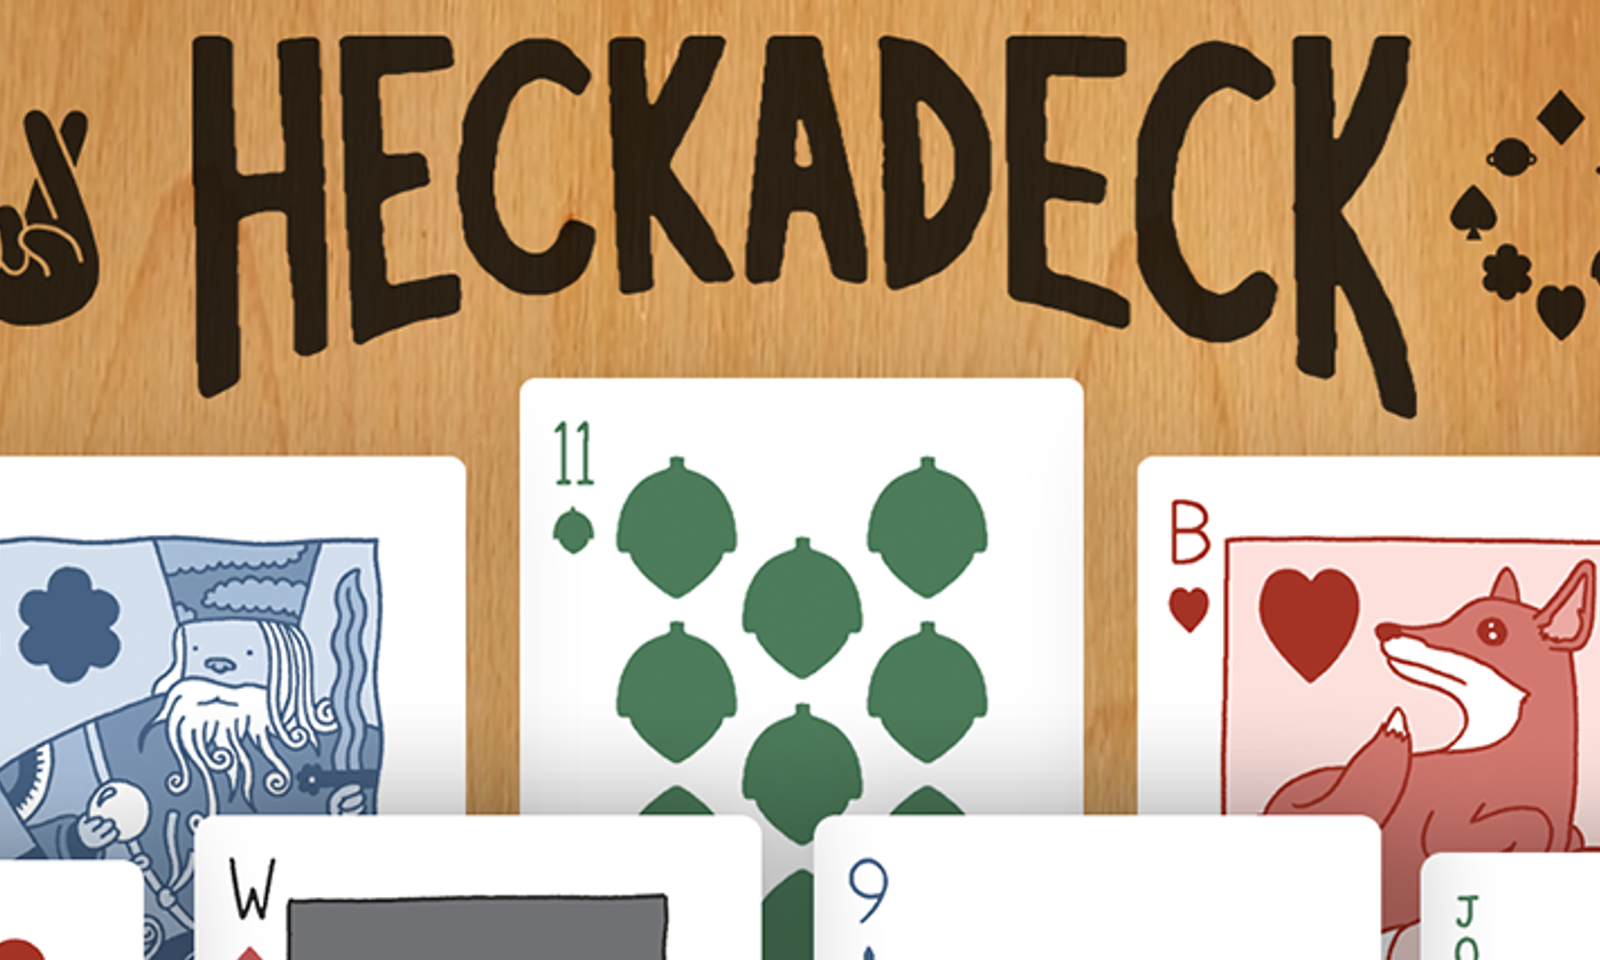 Heckadeck image with playing cards from the Heckadeck